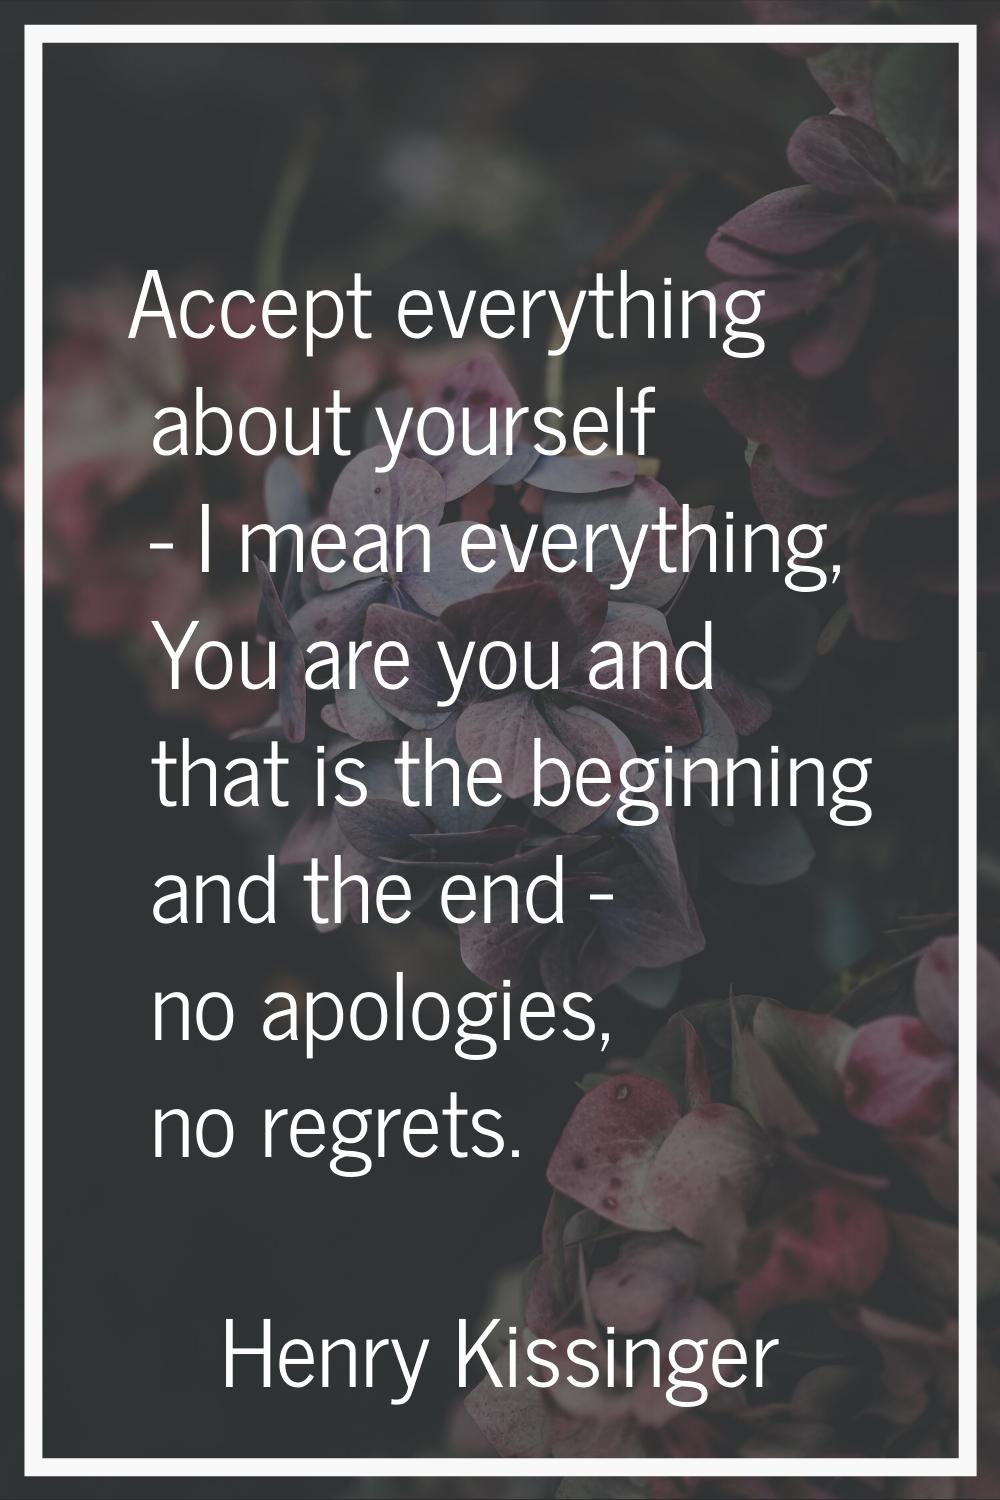 Accept everything about yourself - I mean everything, You are you and that is the beginning and the